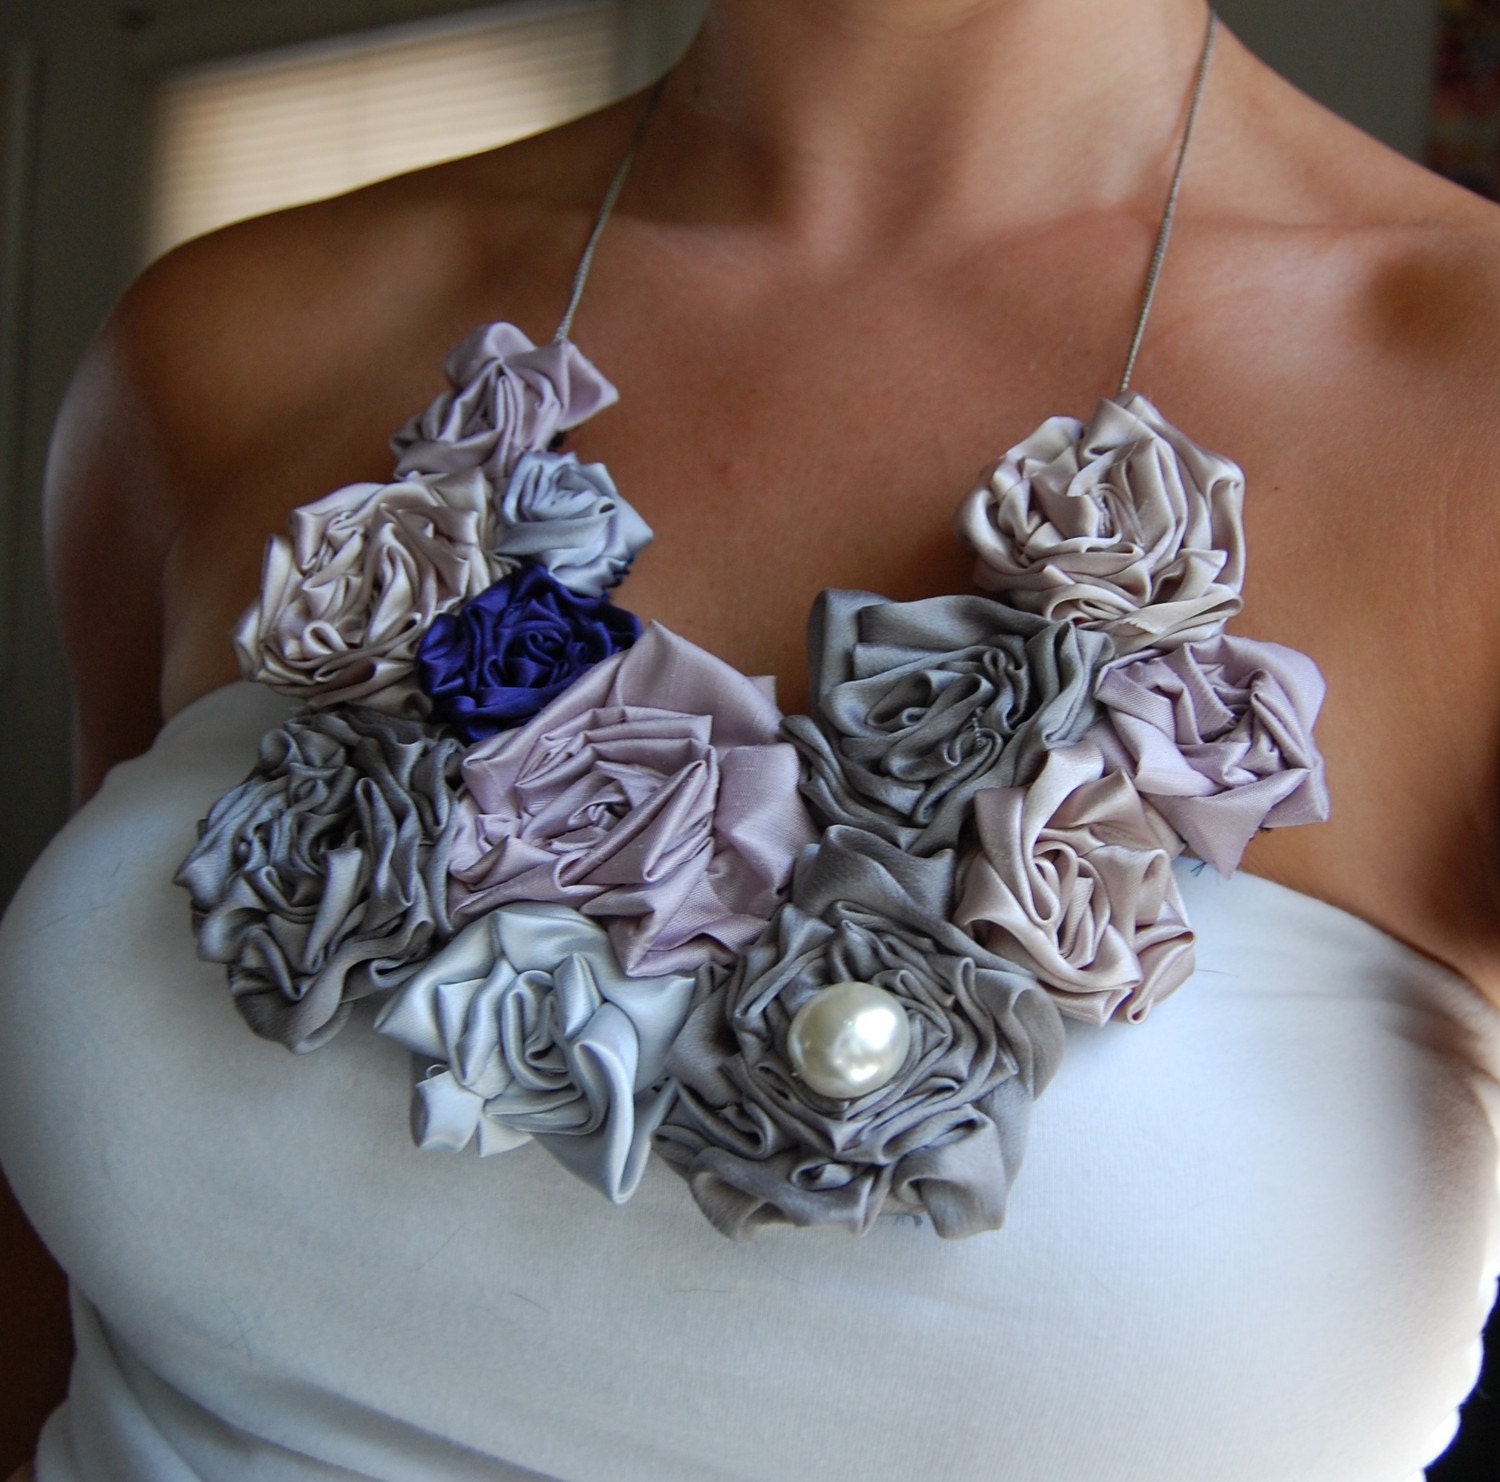 Shades of Gray Bouquet Necklace with Pearl detail